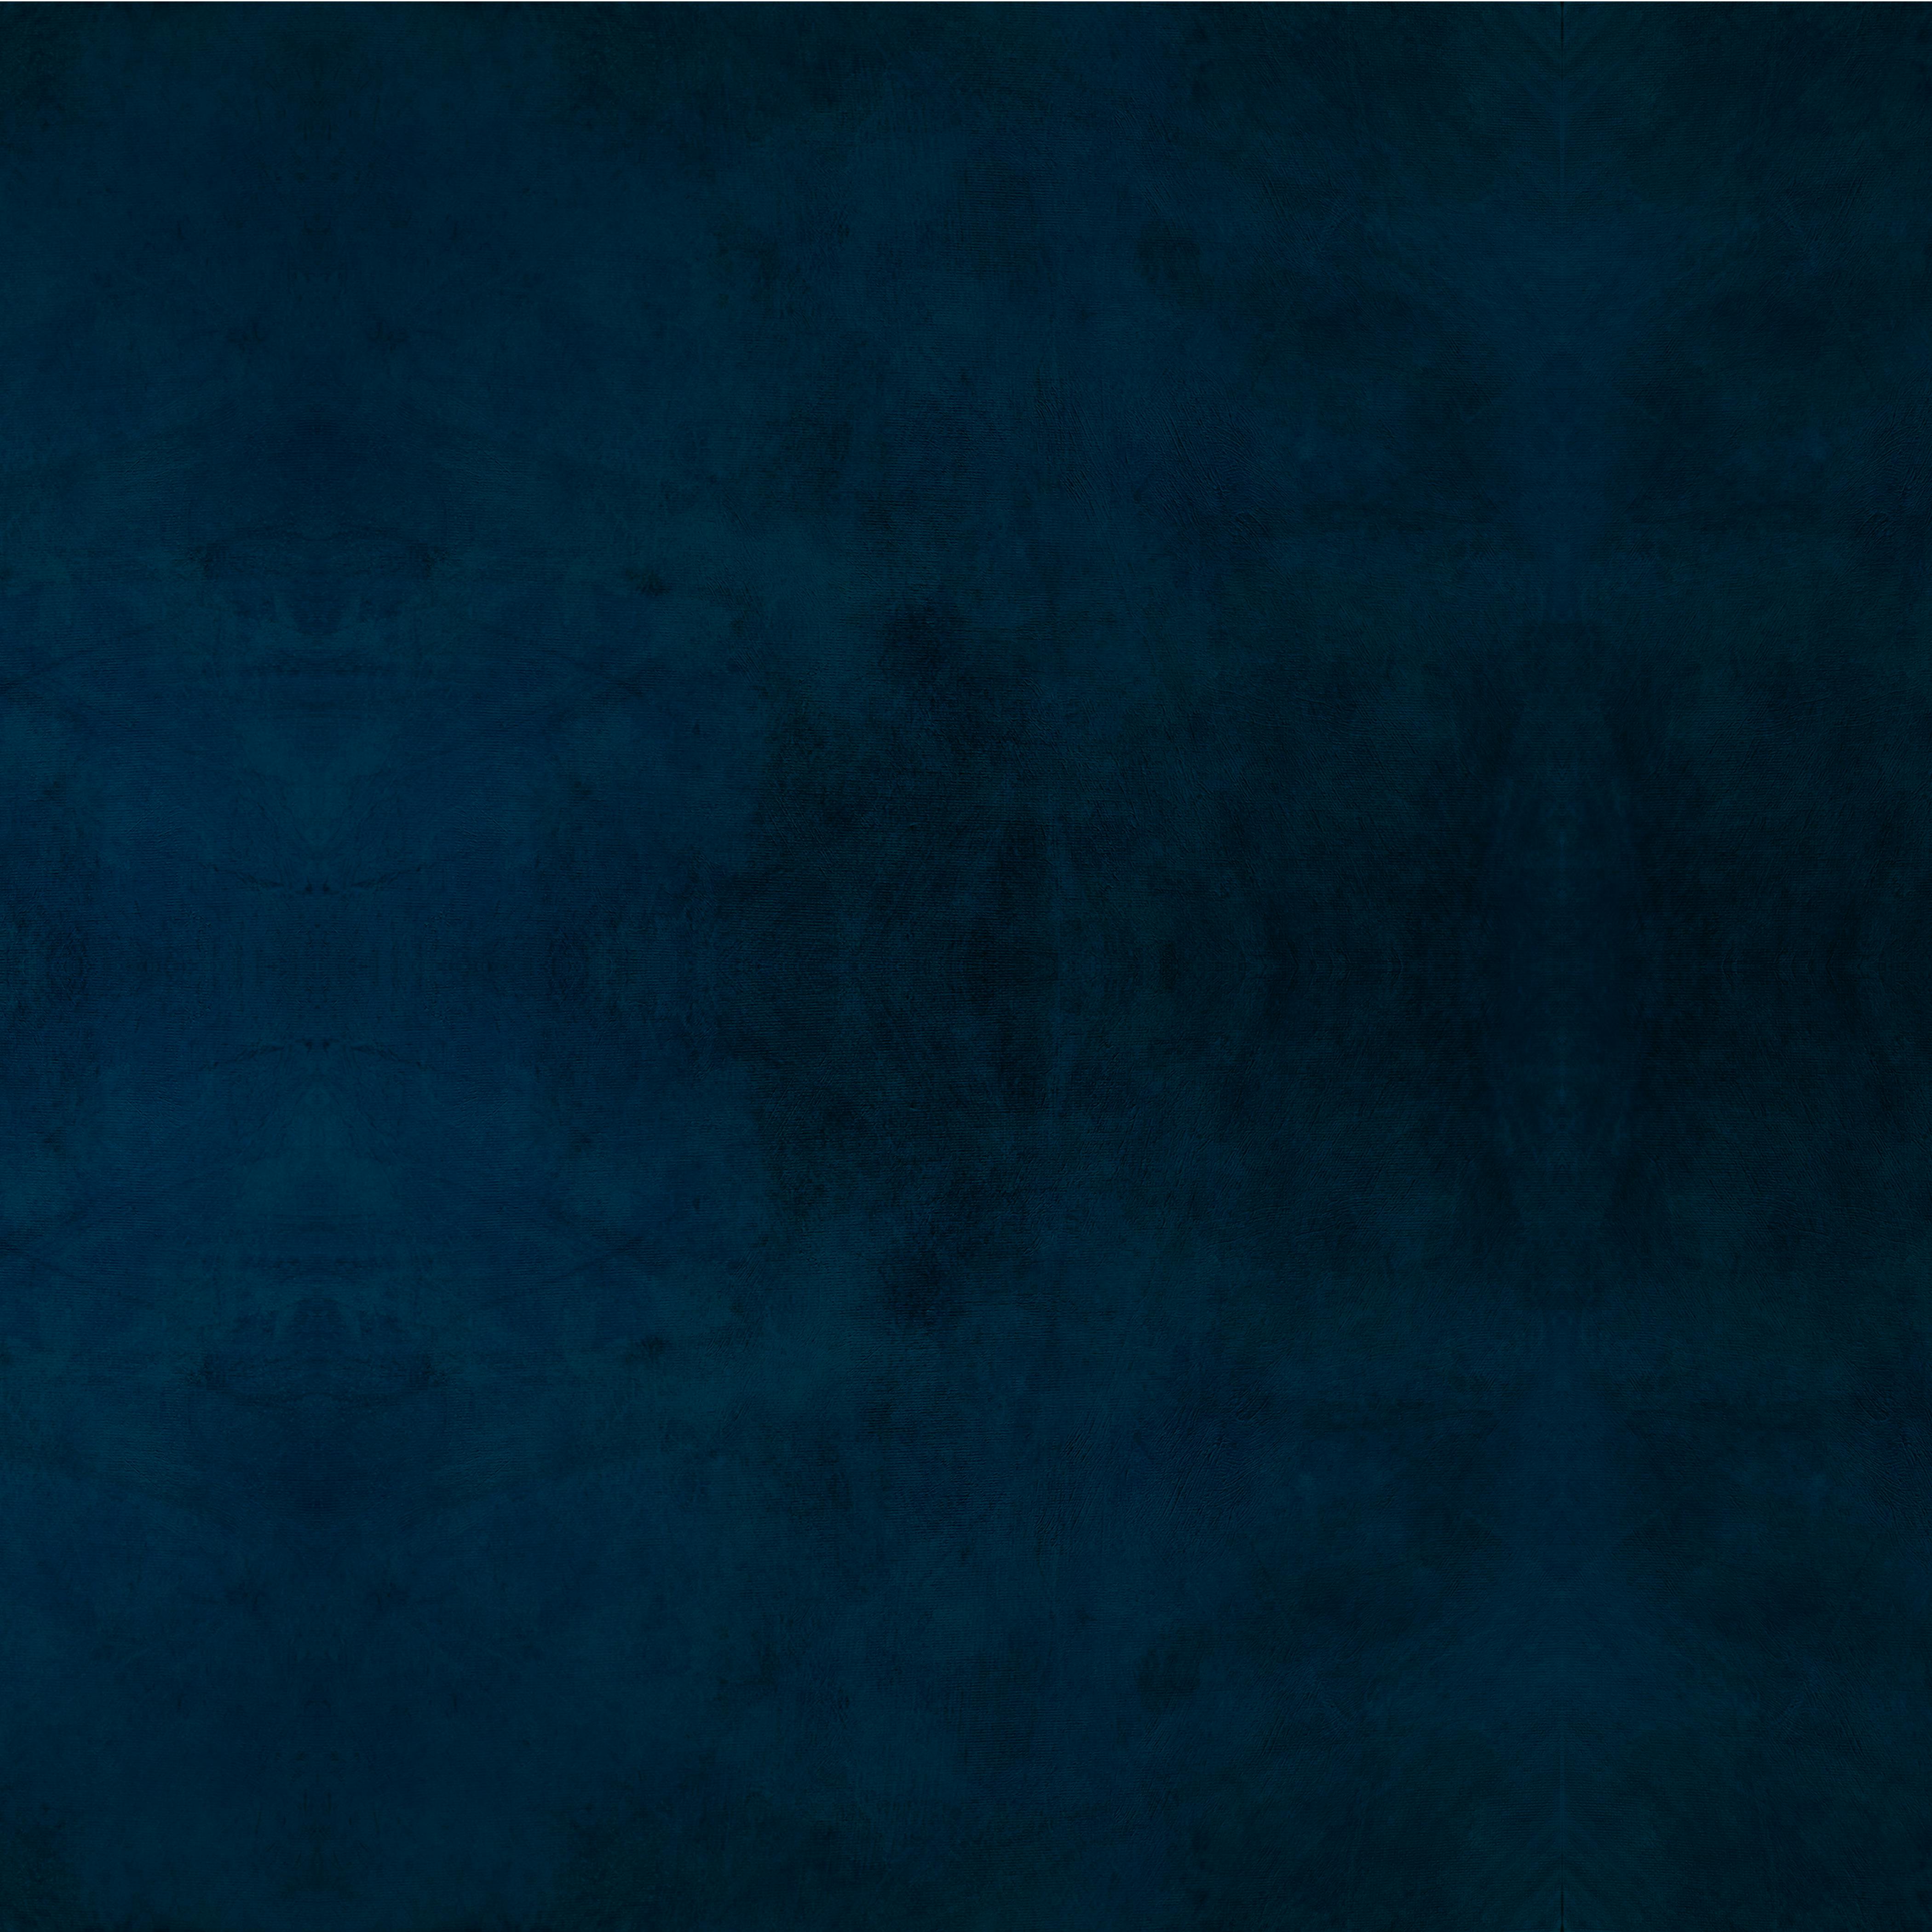 Free stock photo of blue, Blue canvas texture, canvas